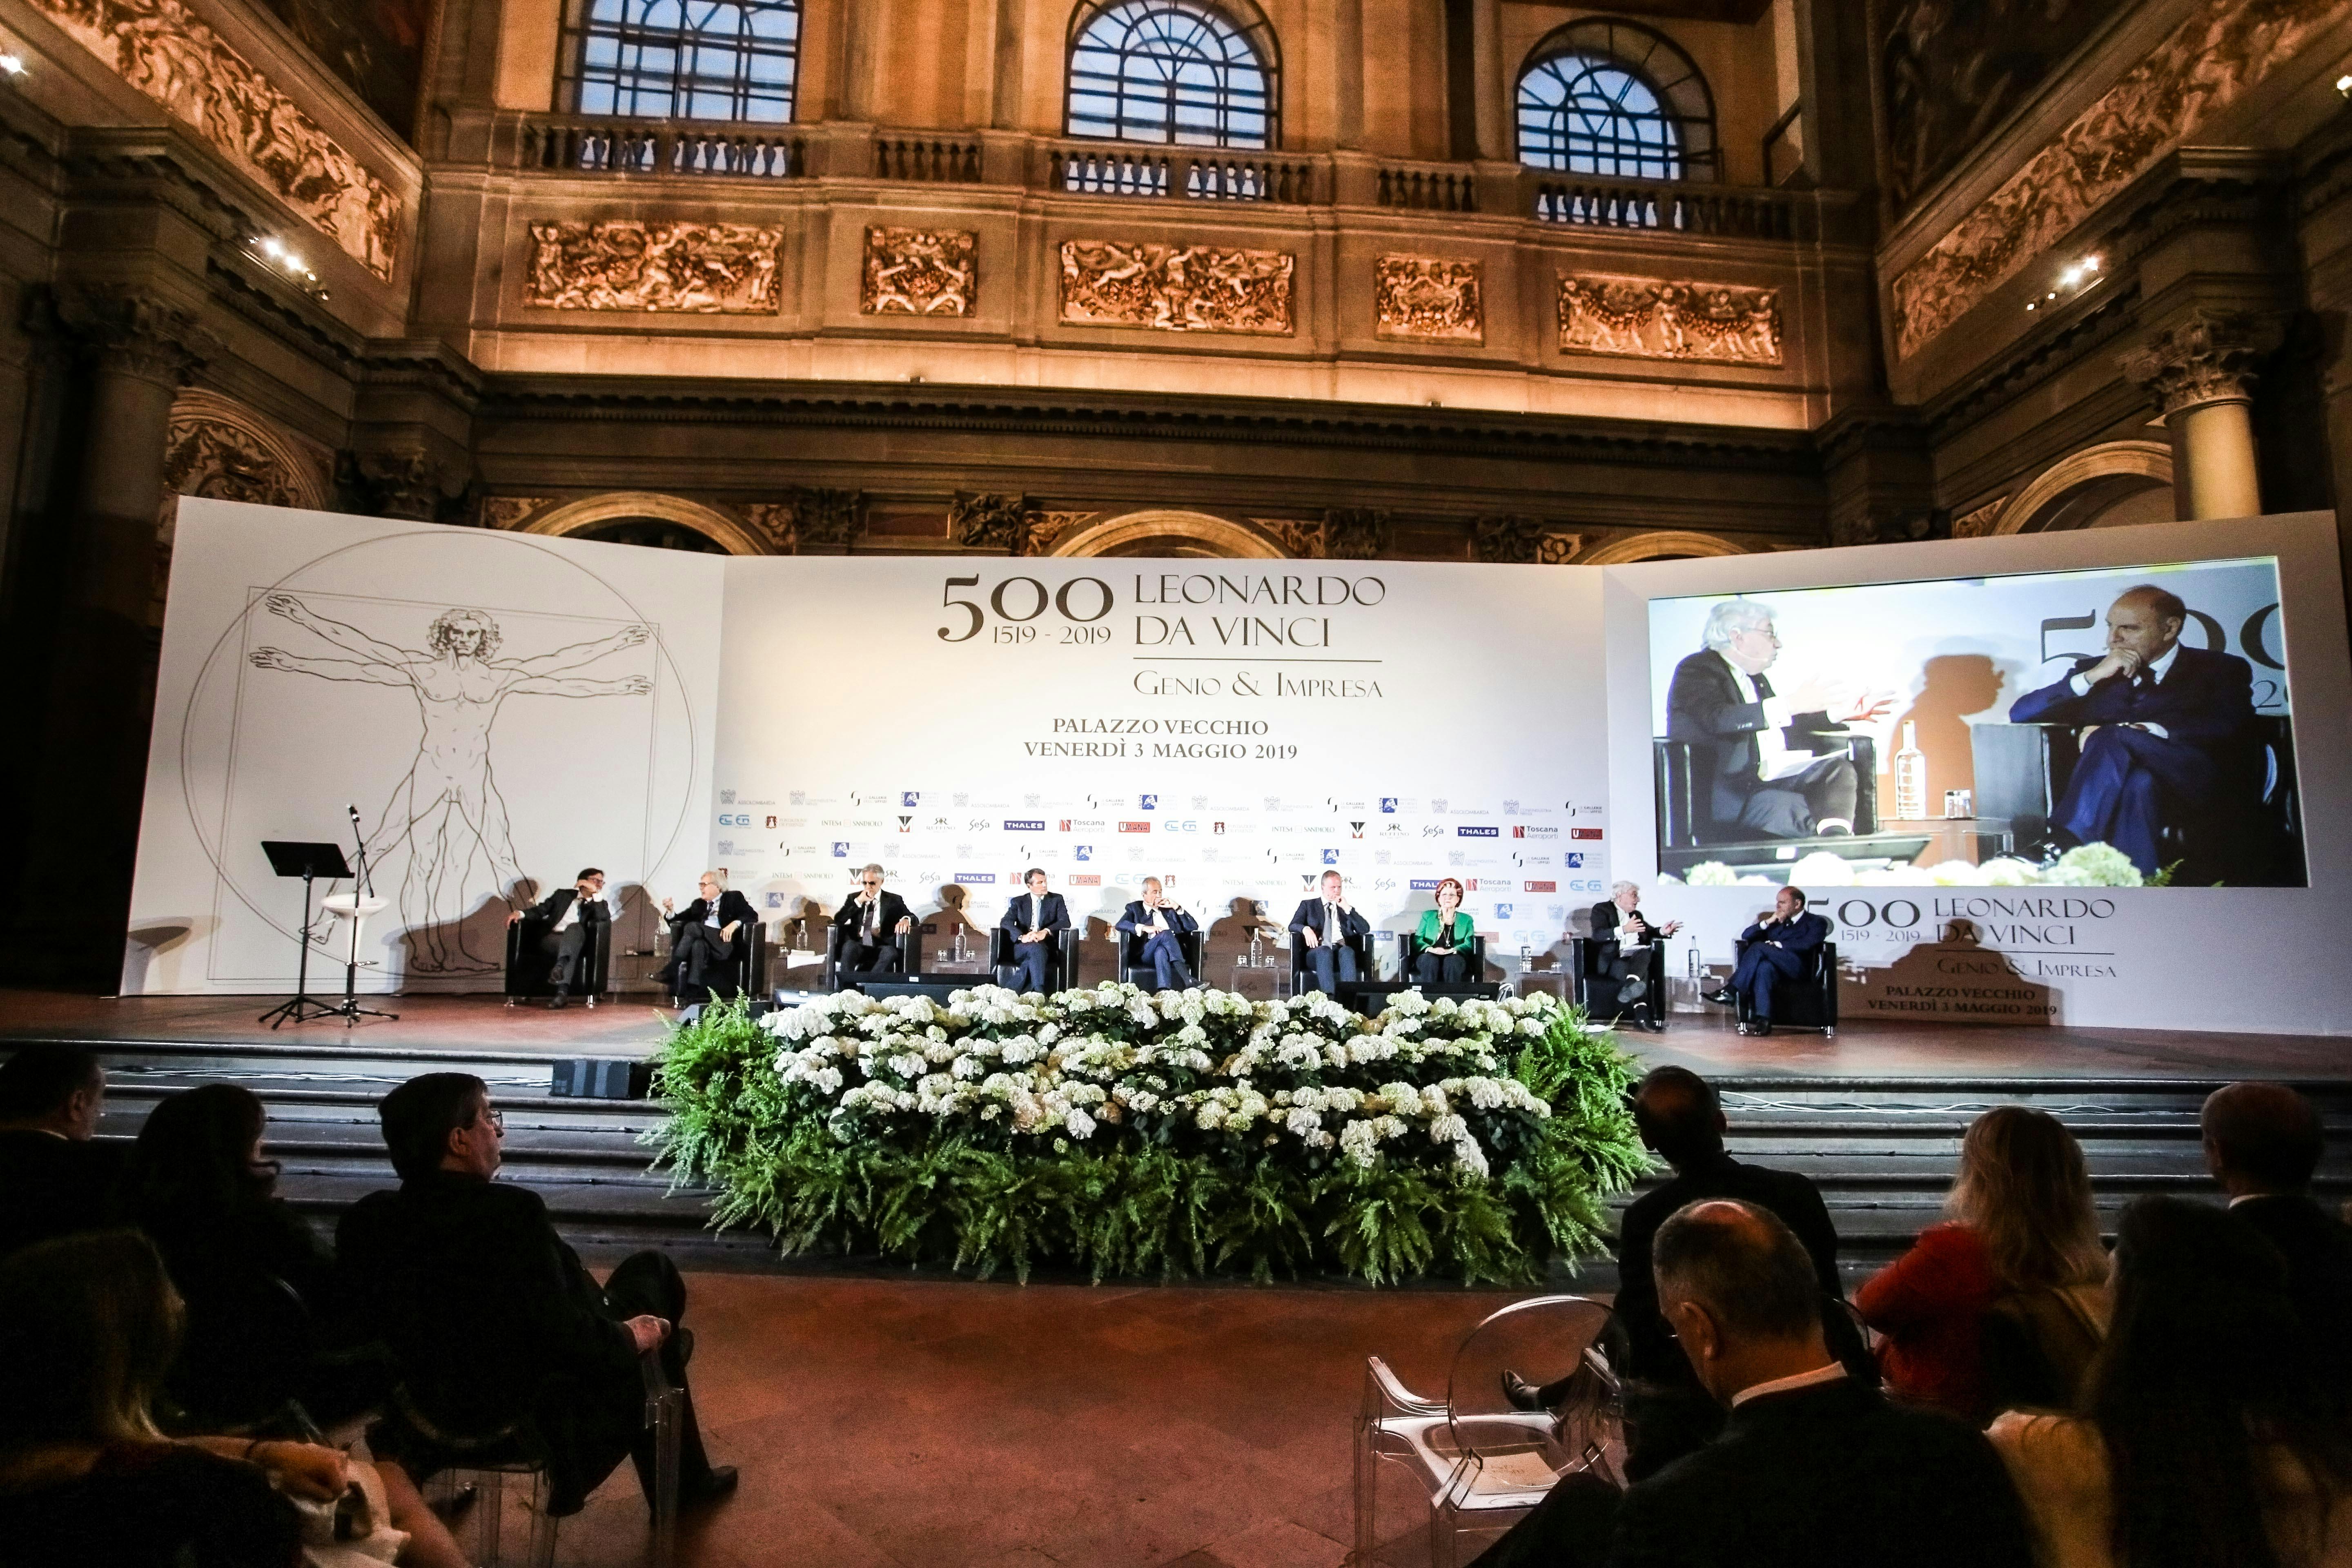 Meeting in the salone dei 500